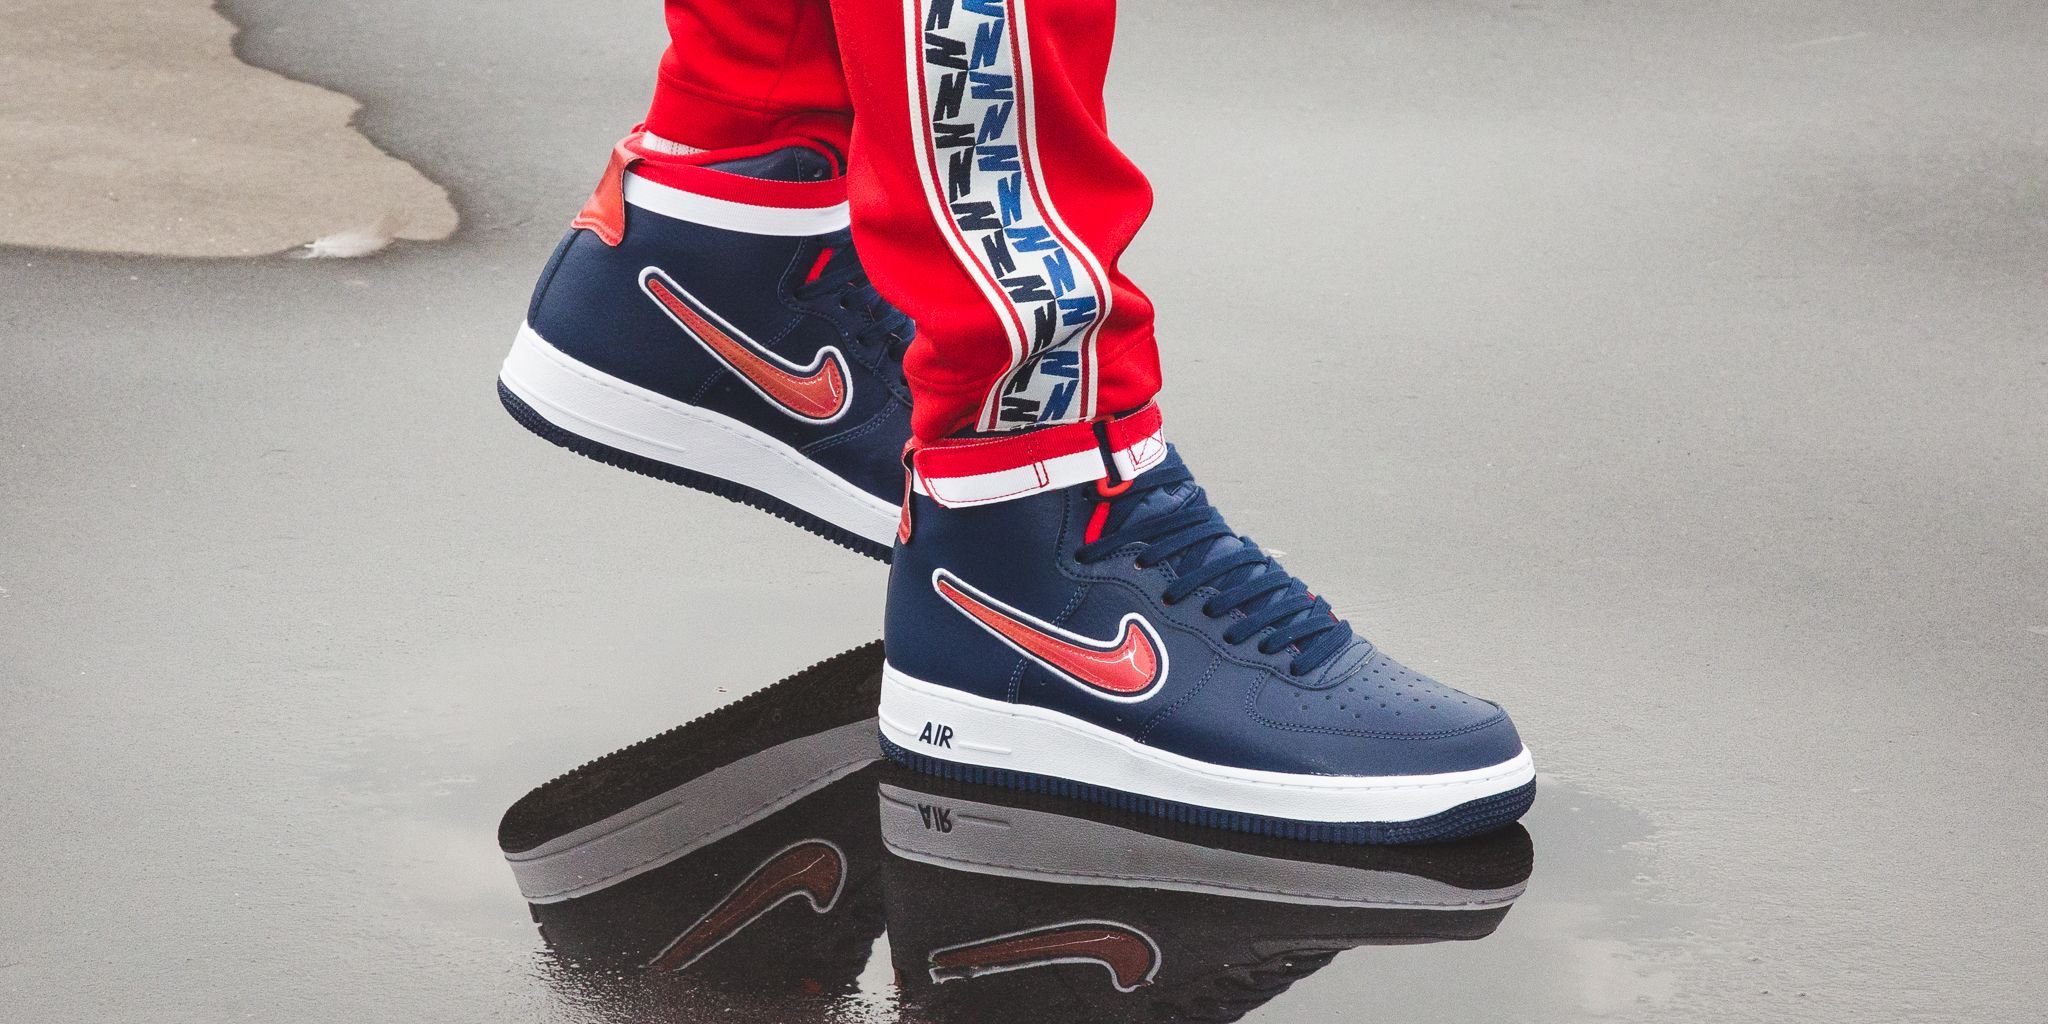 Thanks carpet scrub Titolo on Twitter: "Nike Air Force 1 High '07 Lv8 Sport "NBA" Midnight  Navy/University Red-White RELEASE: Thursday, 4th October 9AM CET l i n k ➡️  https://t.co/cWifTkyJ7J #nike #af1 #AirForce #AirForceOne #niketalk #